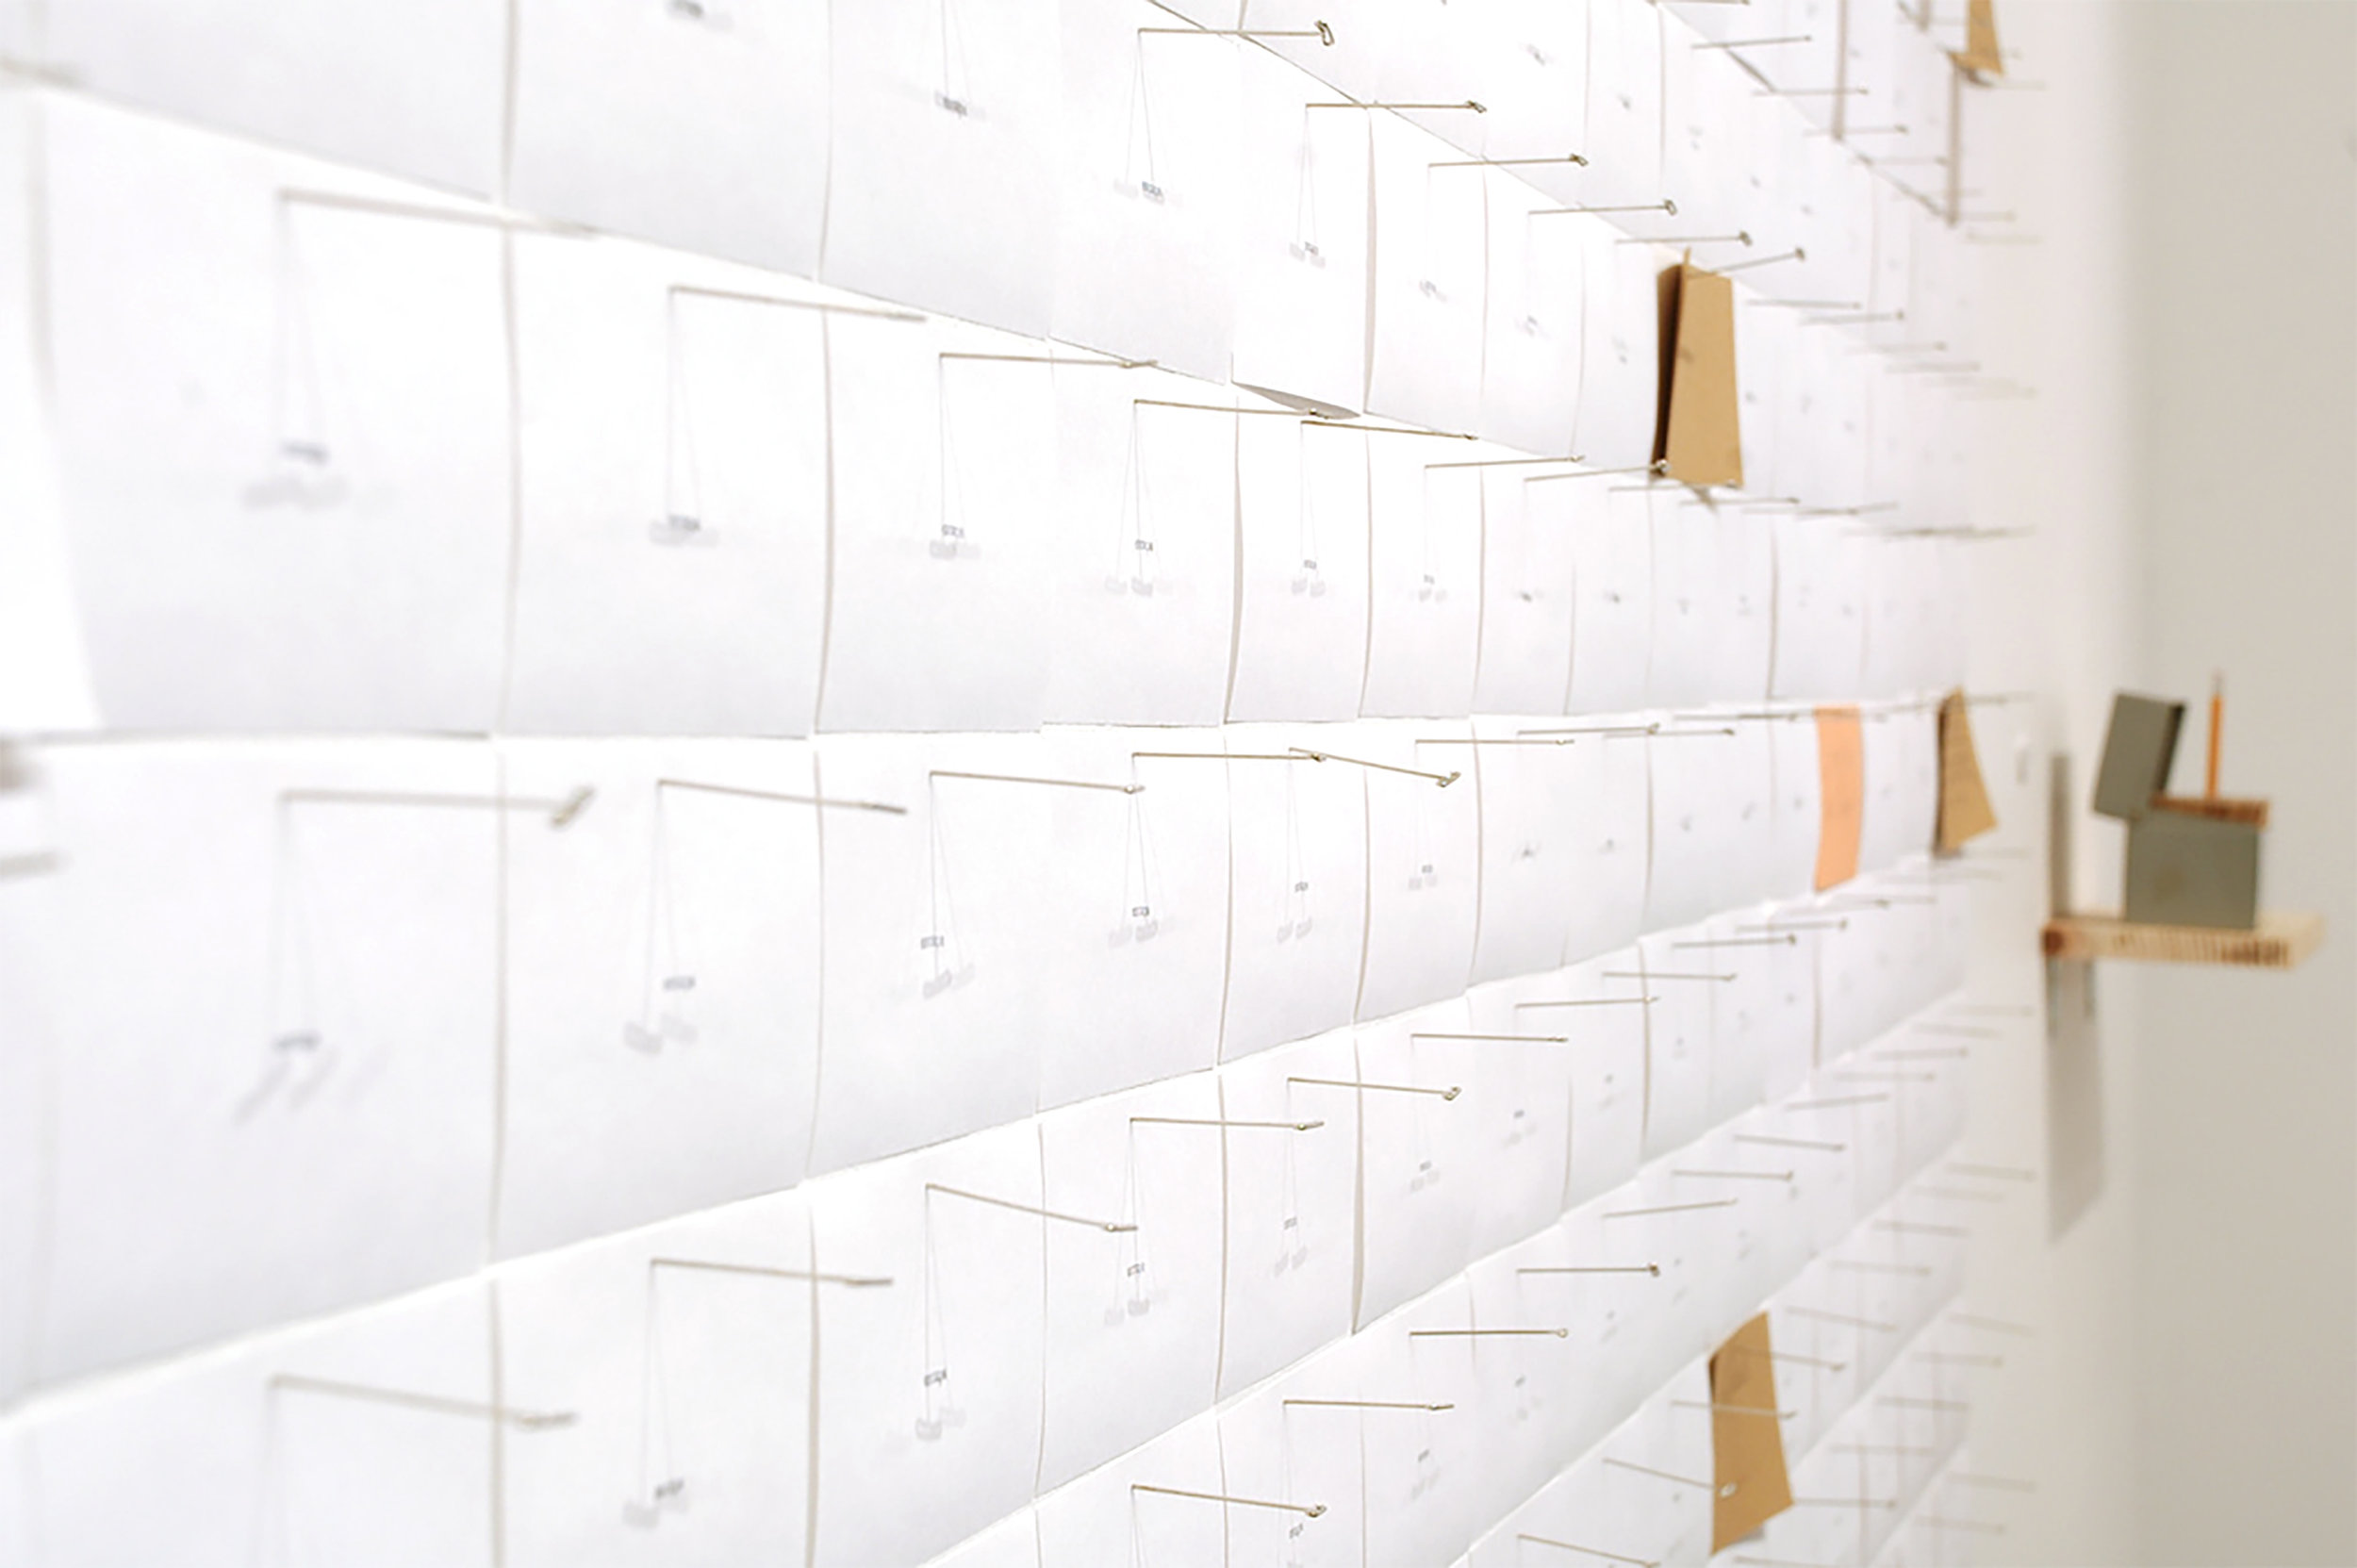   Always Have an Escape Plan  (detail),   Installation Size Varies, 240 index cards &amp; T-pins, 2014 